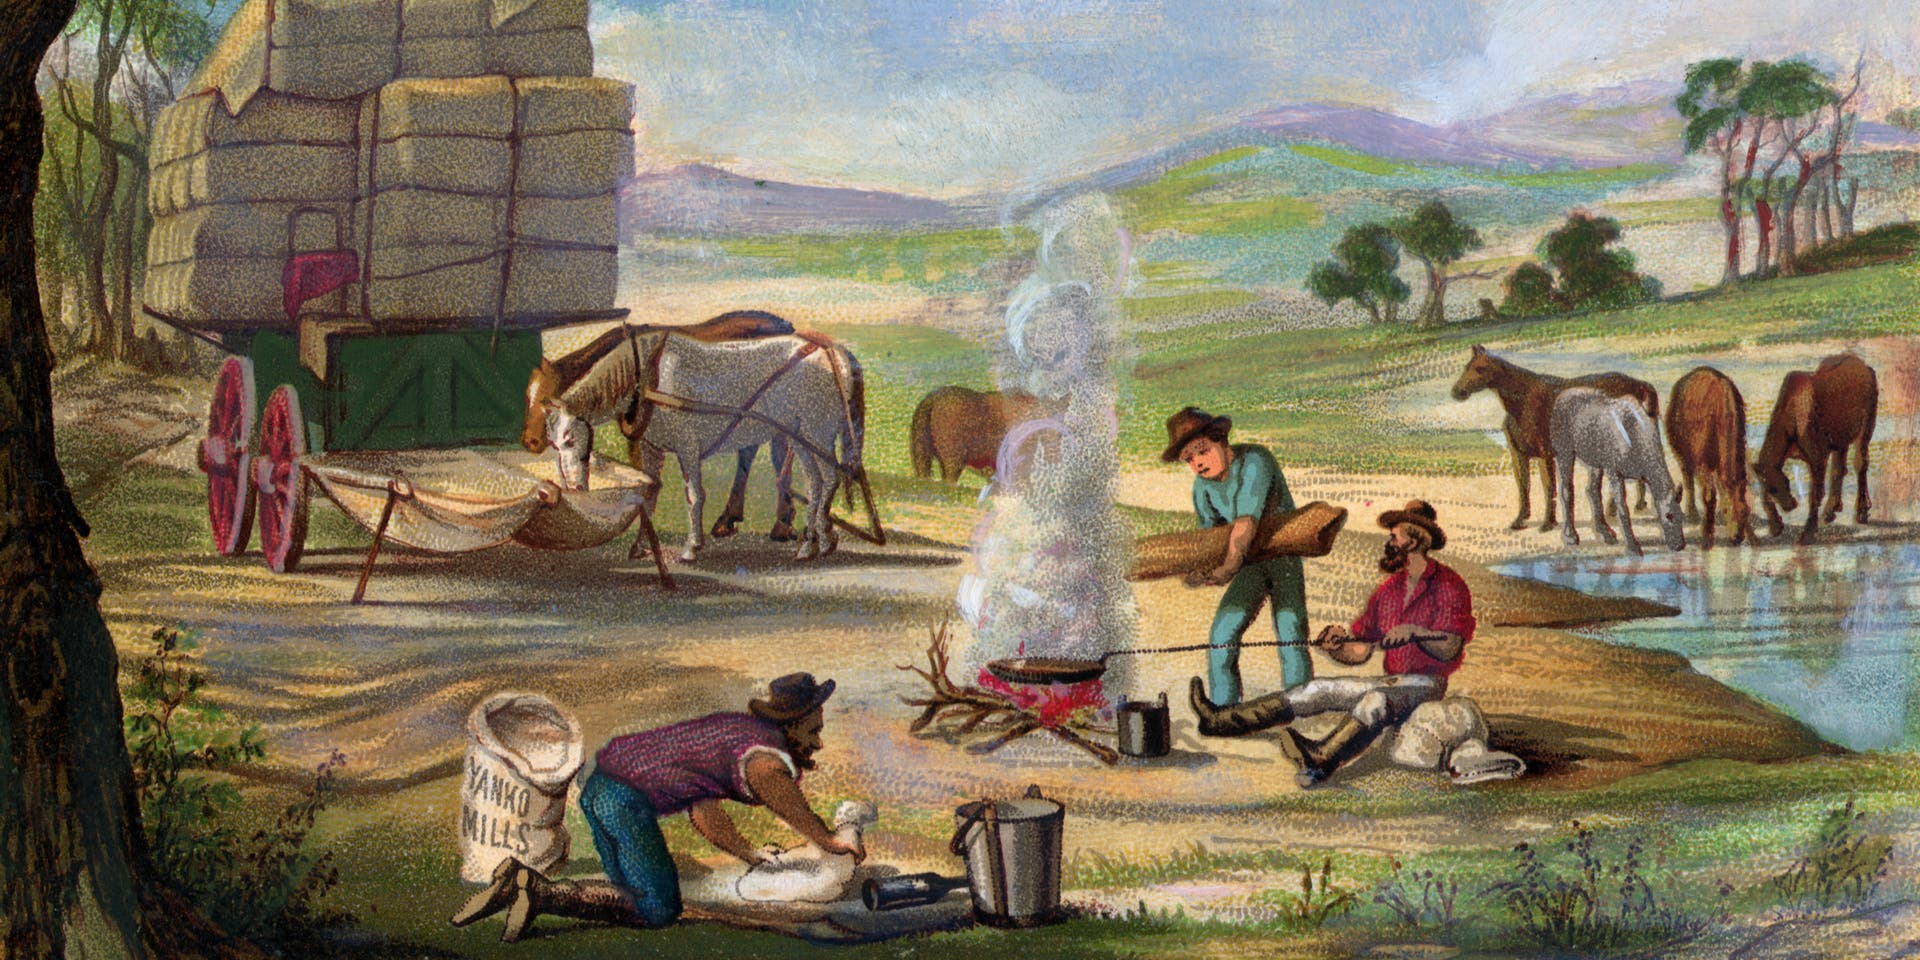 Teamsters Camping For The Night(Original Caption) Go Movement. Teamsters establishing bivouac for night. Mid 19th Century wash drawing.